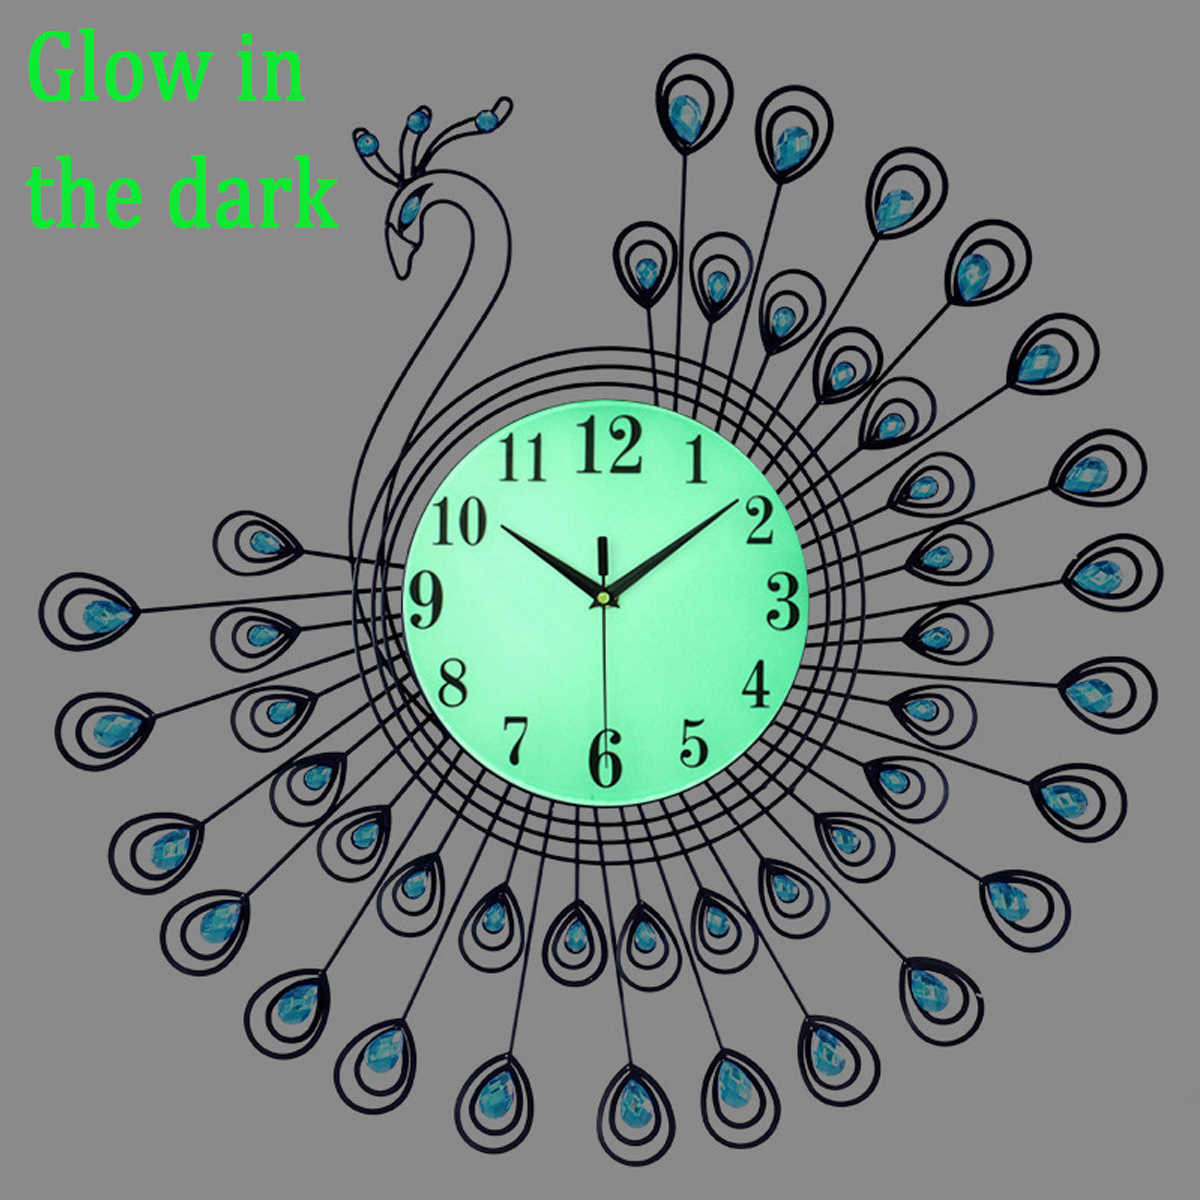 54x54cm-Peacock-Large-Wall-Clock-Grow-In-Dark-Living-Room-Bedroom-House-Decorations-1450327-5